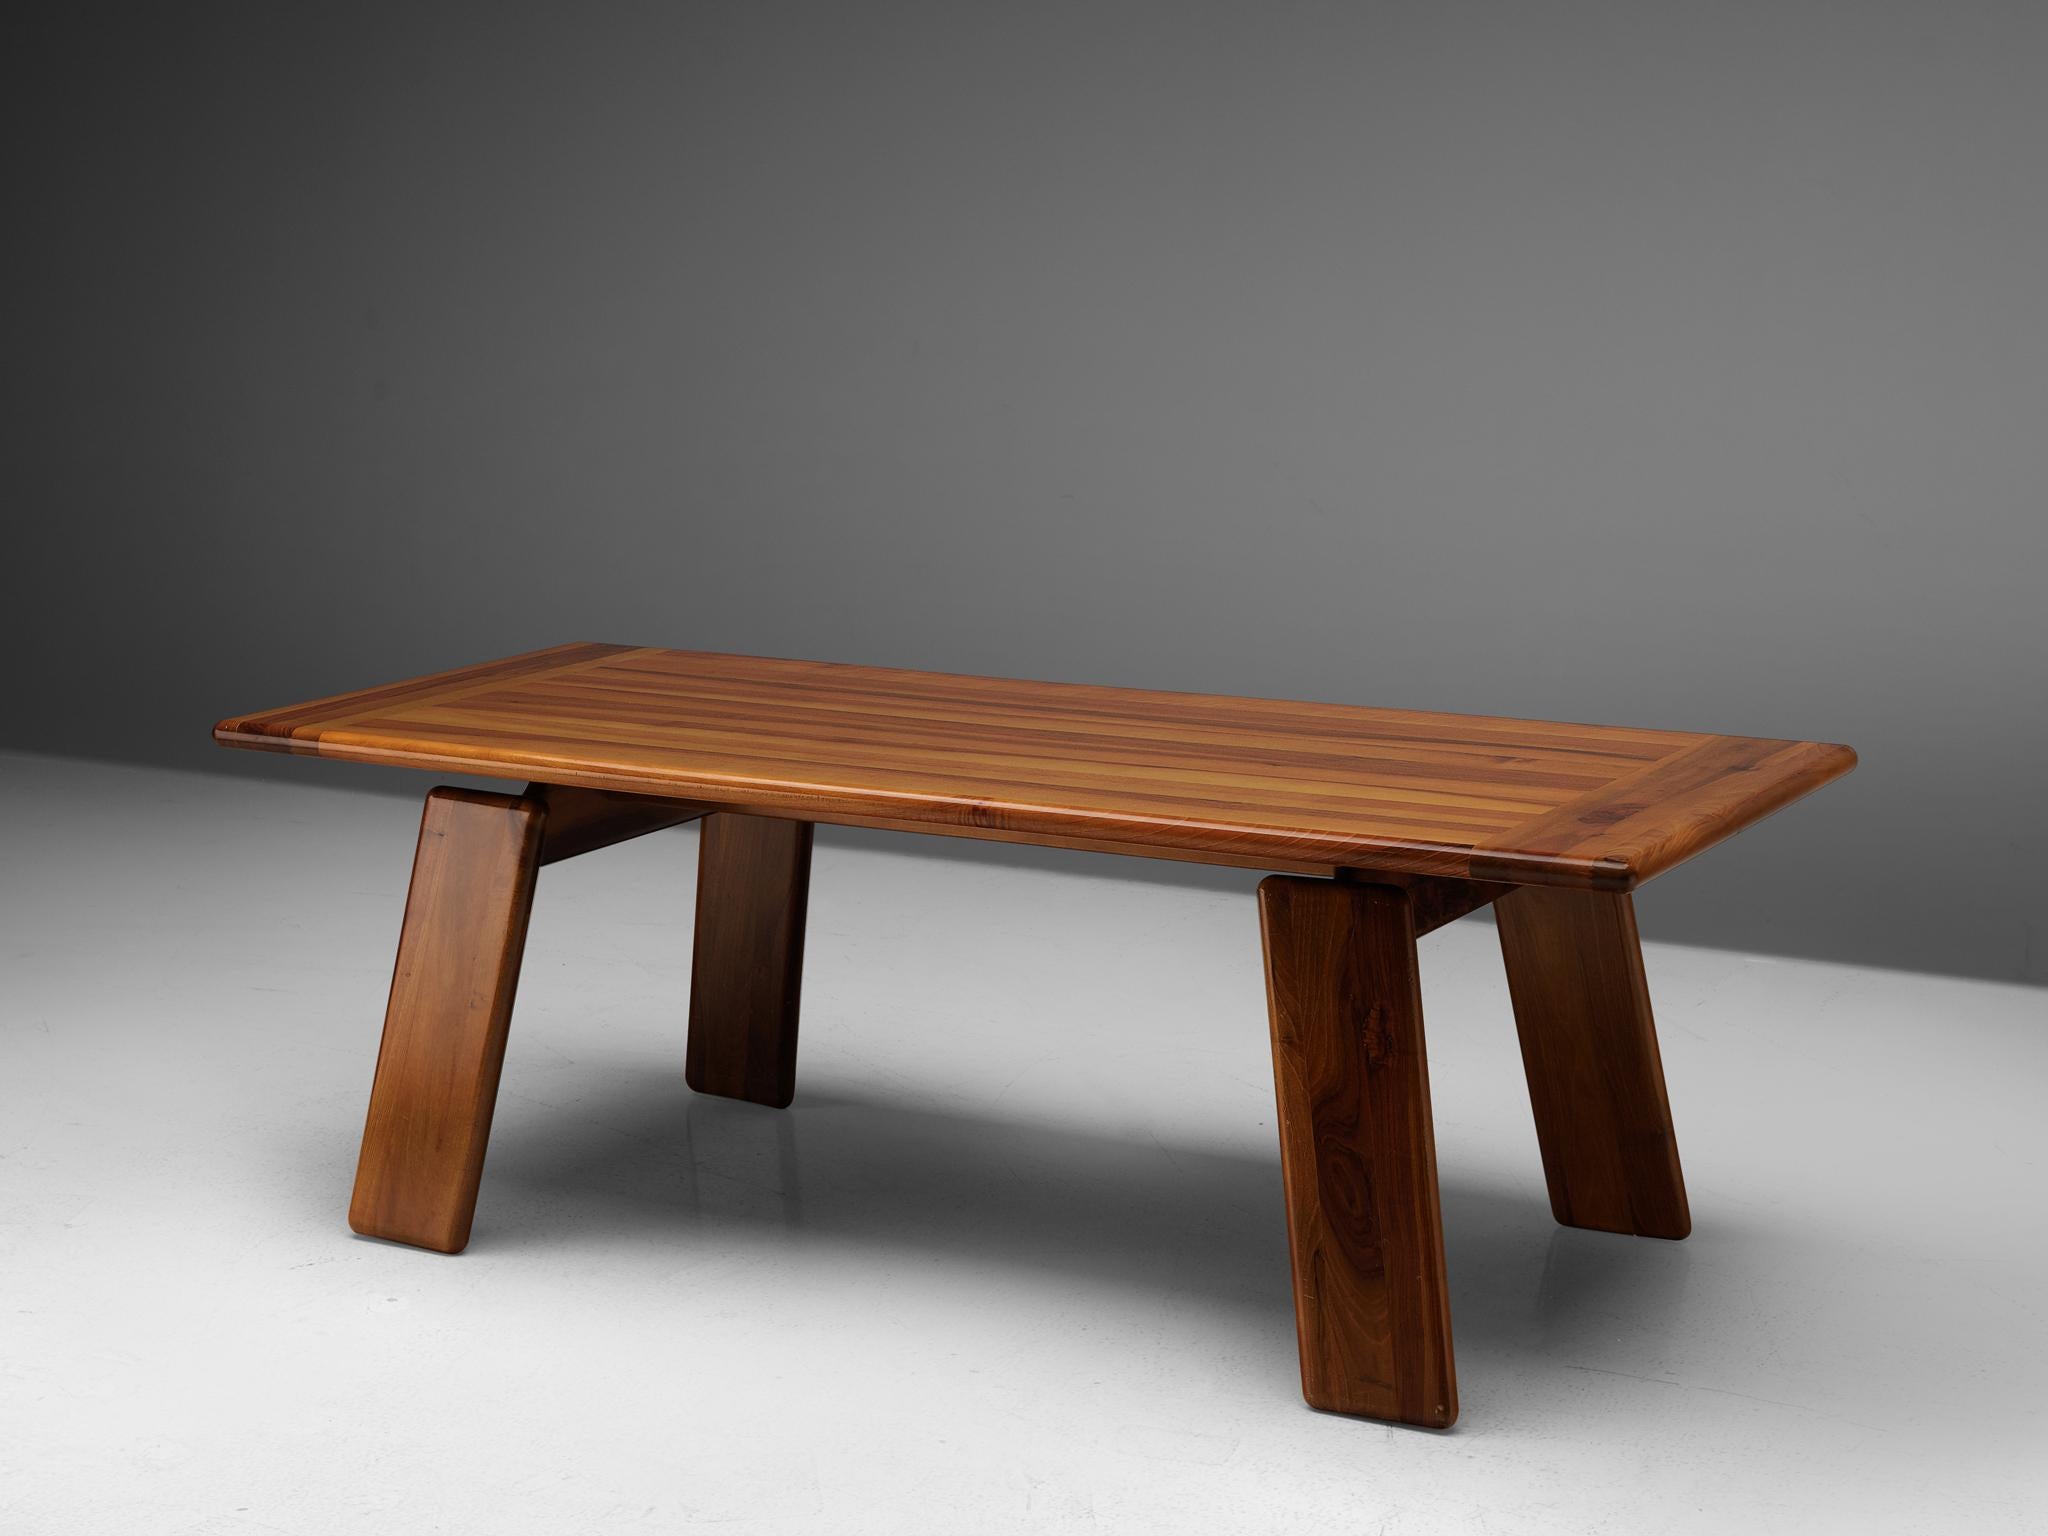 Sapporo for Mobil Girgi, dining table, walnut, Italy, 1970s.

Geometric dining table by Sapporo from the '70s. The table is made in walnut and shows magnificent lines. The tilted legs are not directly connected to the table, but connected to a